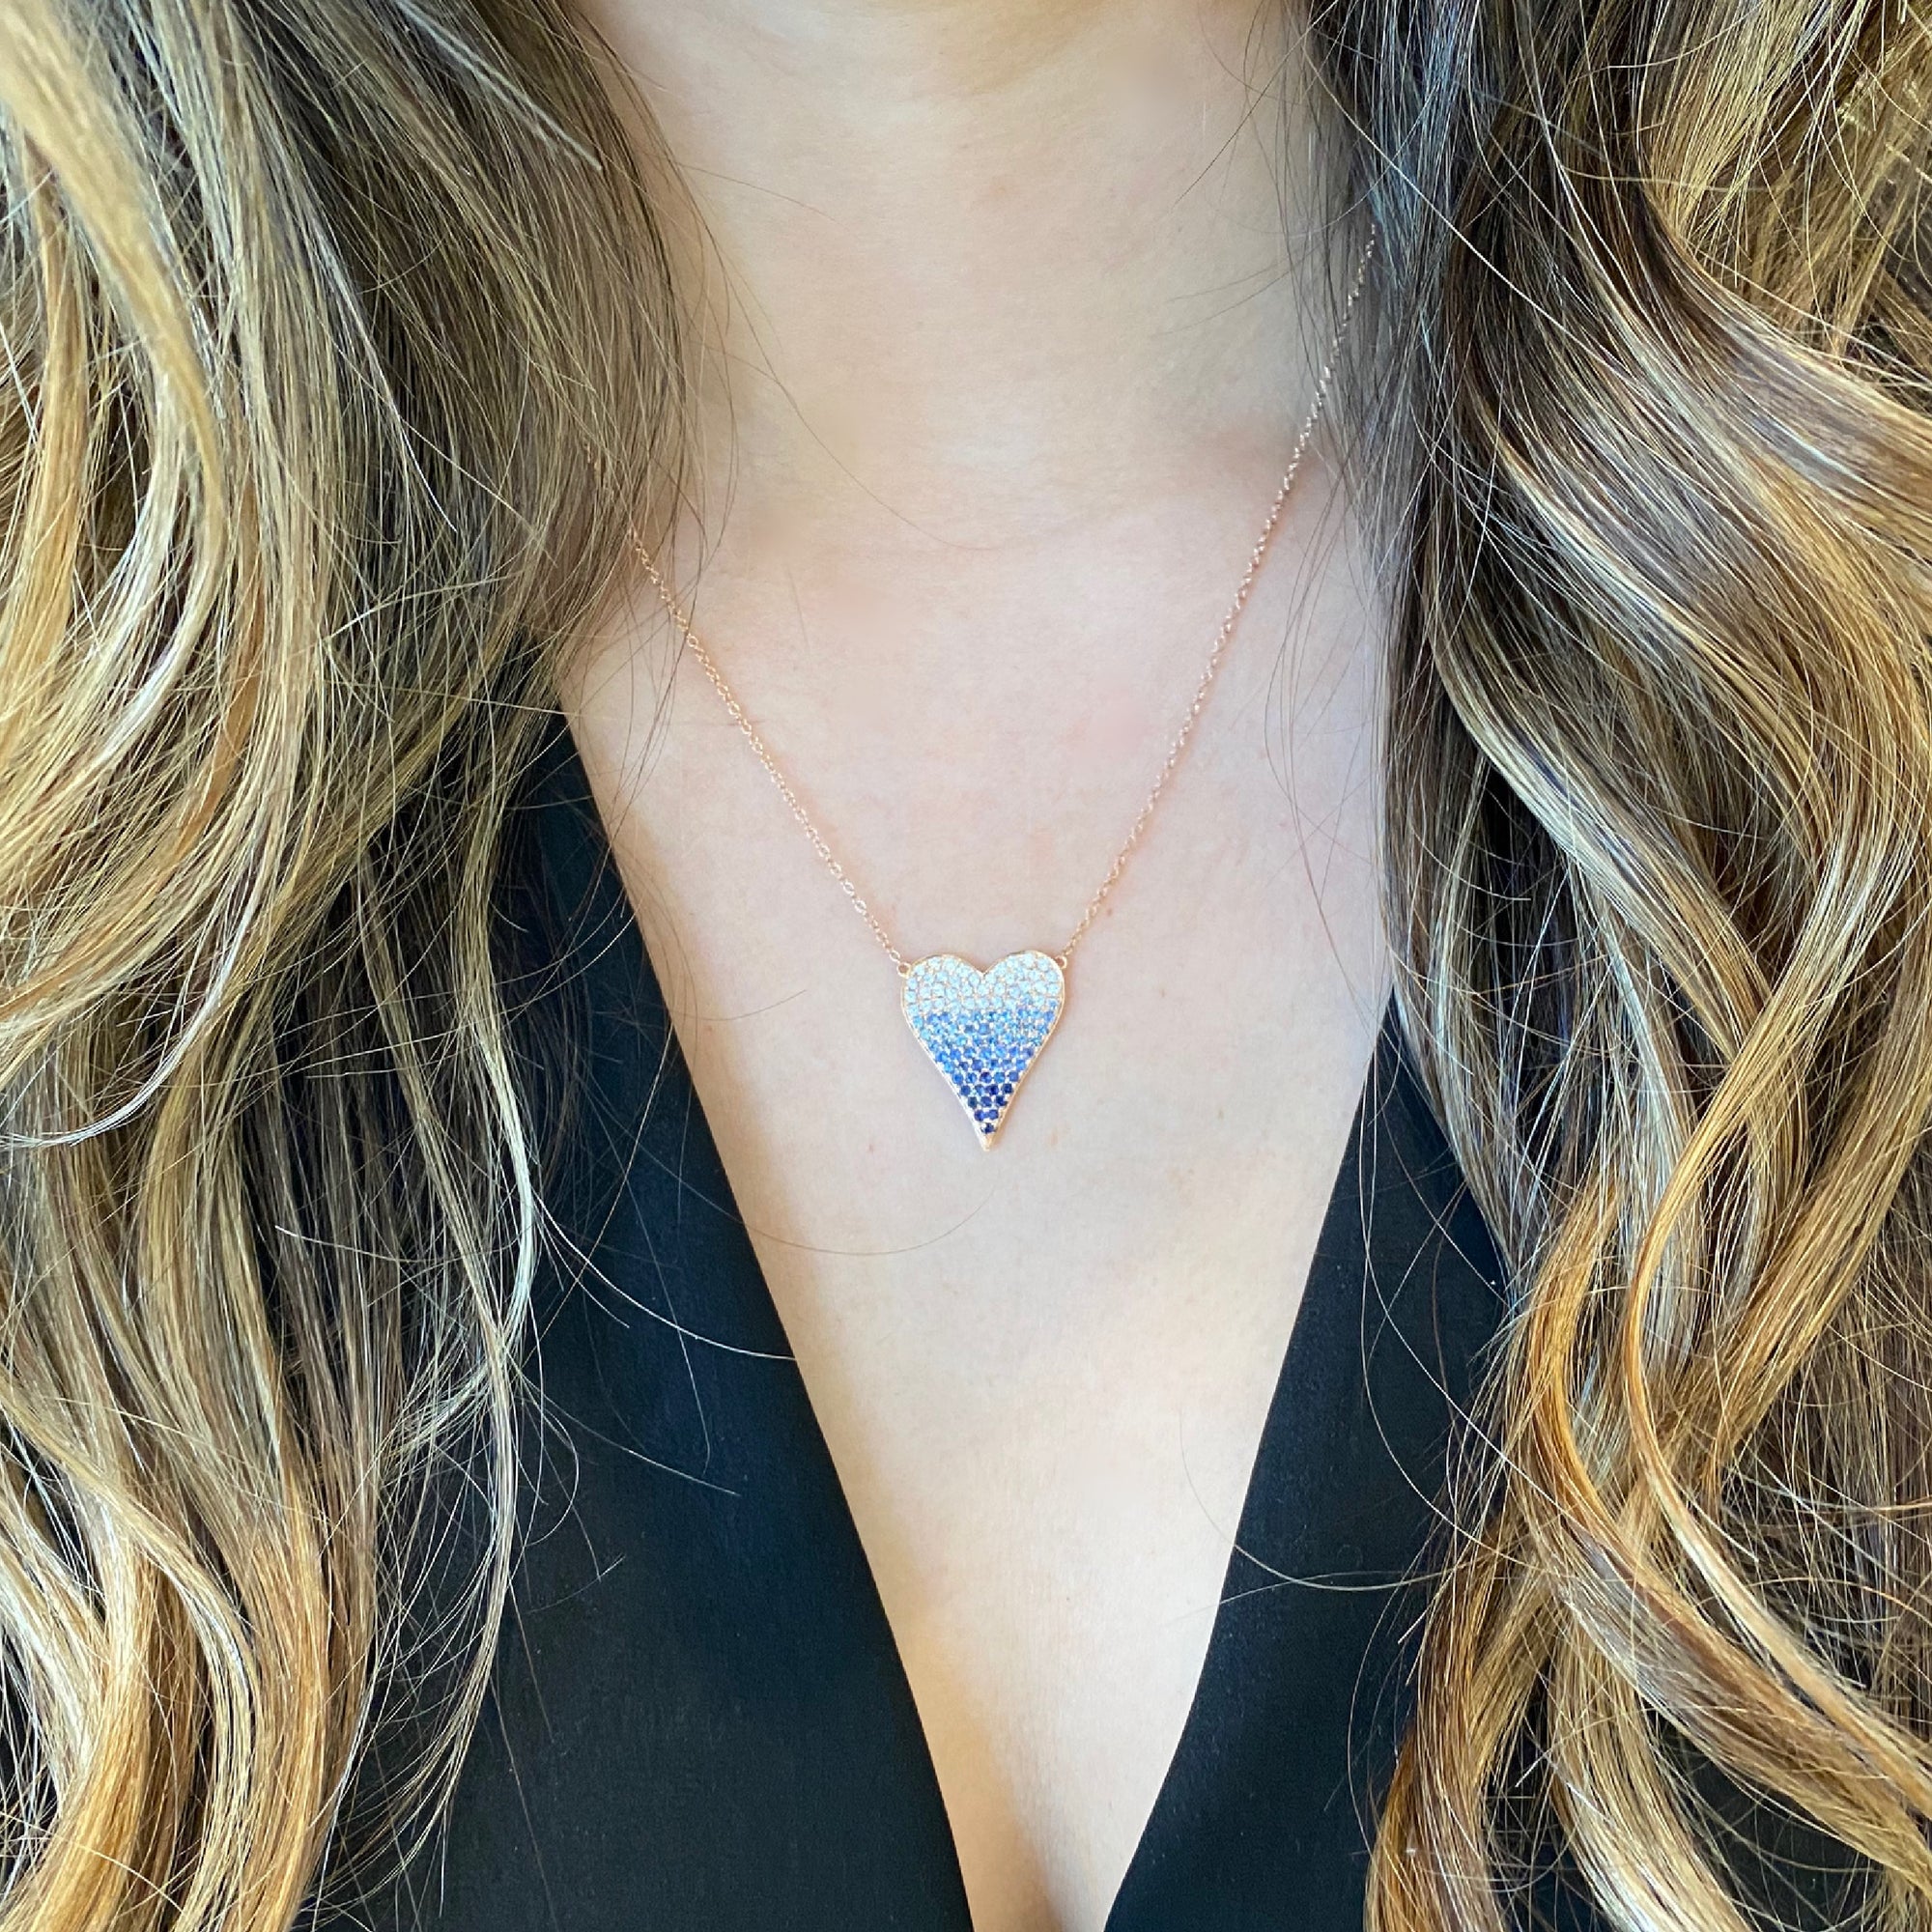 Sapphire Gradient Heart Pendant - 14K rose gold weighing 3.25 grams - 6 round diamonds totaling 0.07 carats - 89 sapphires totaling 1.02 carats